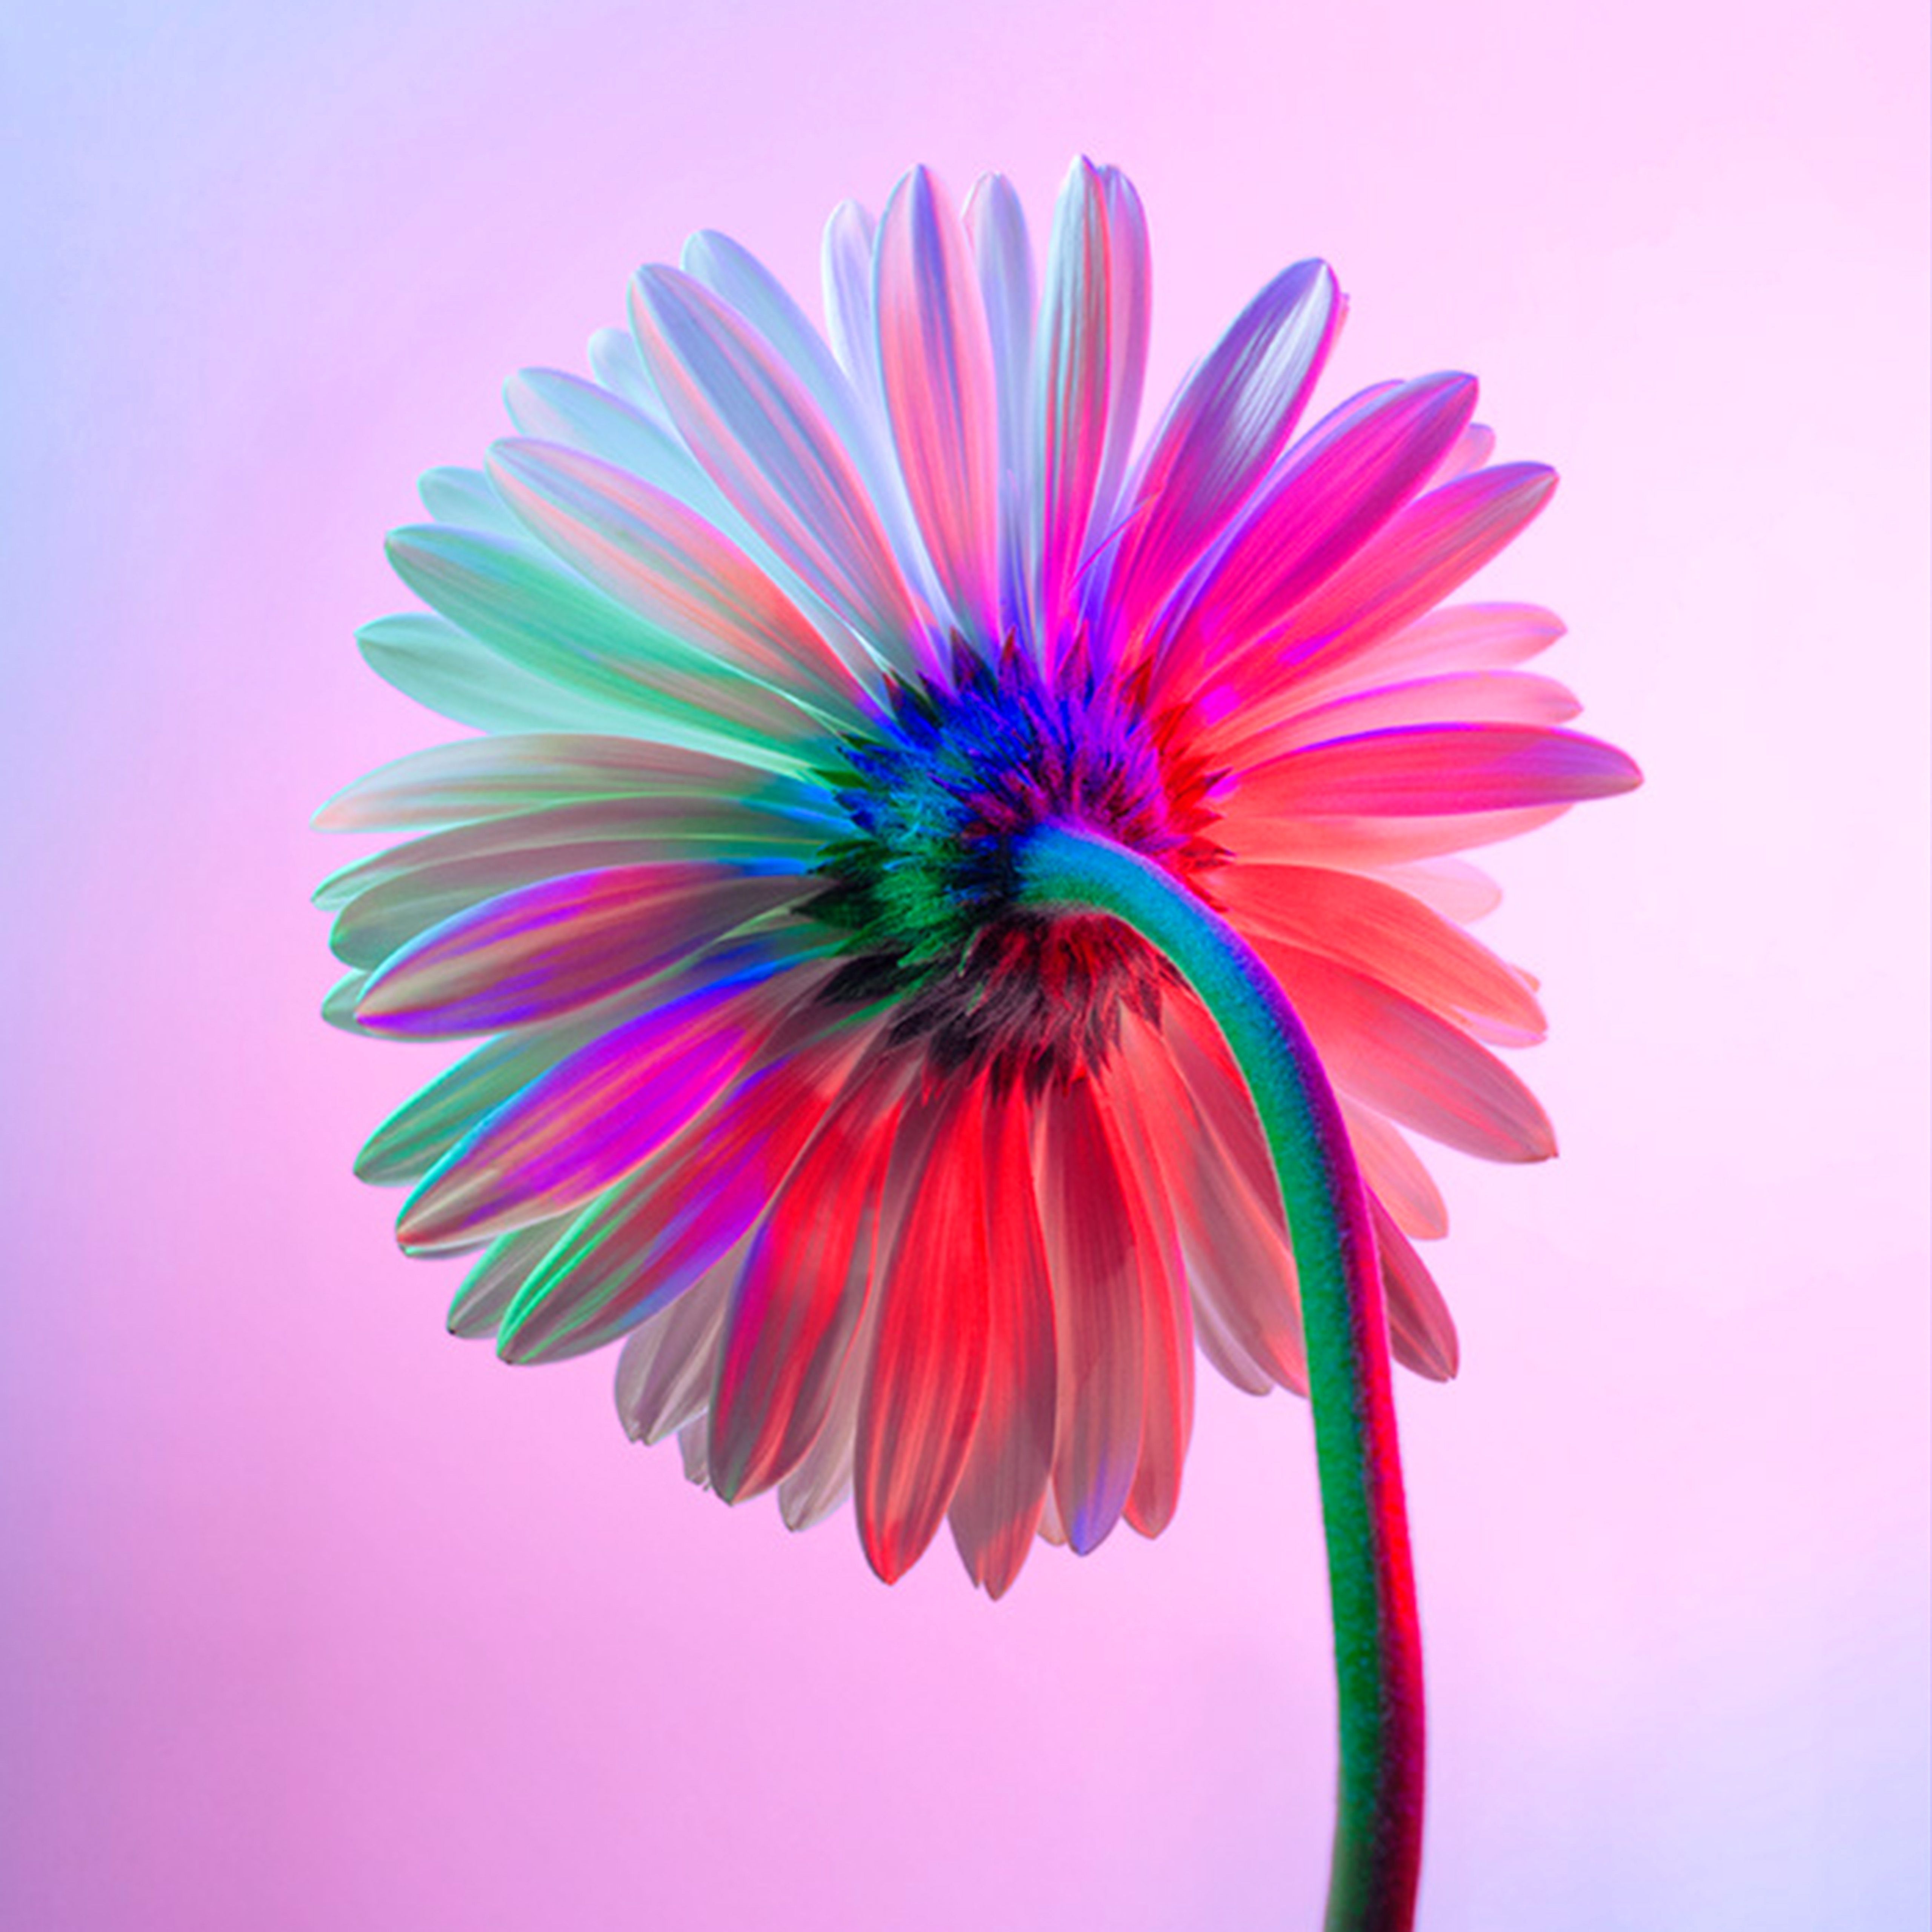 A flower with colorful petals and stem - Rainbows